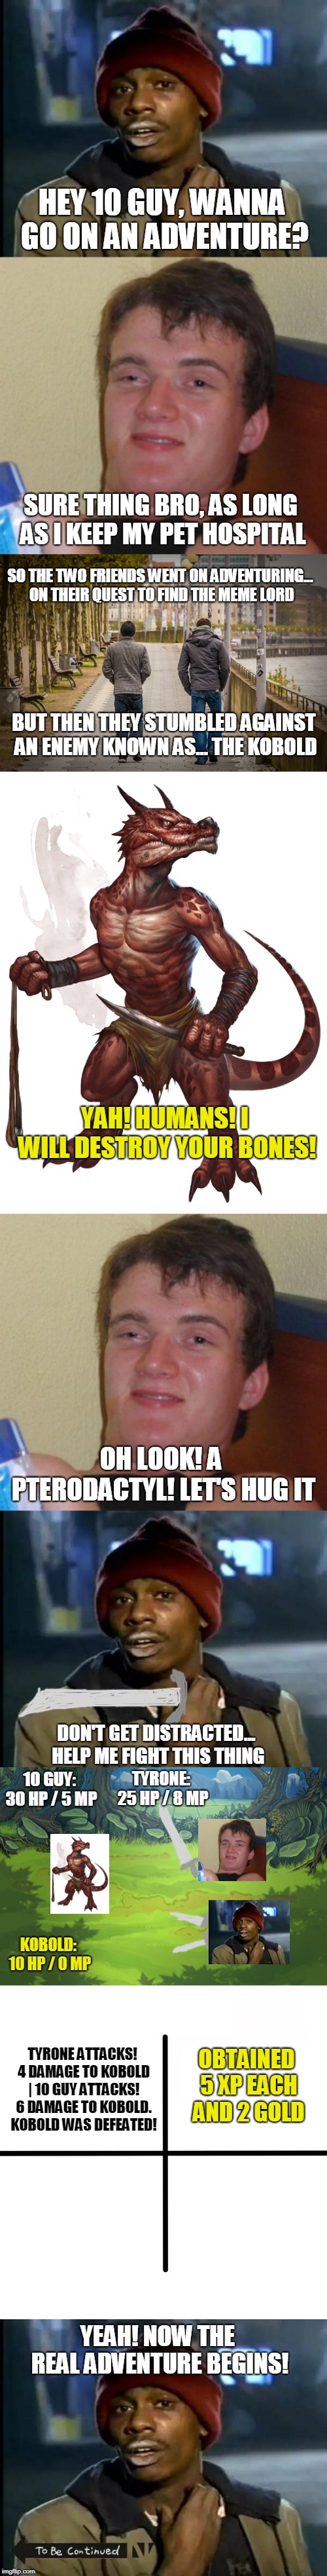 ImgFlip RPG | HEY 10 GUY, WANNA GO ON AN ADVENTURE? SURE THING BRO, AS LONG AS I KEEP MY PET HOSPITAL; SO THE TWO FRIENDS WENT ON ADVENTURING... ON THEIR QUEST TO FIND THE MEME LORD; BUT THEN THEY STUMBLED AGAINST AN ENEMY KNOWN AS... THE KOBOLD; YAH! HUMANS! I WILL DESTROY YOUR BONES! OH LOOK! A PTERODACTYL! LET'S HUG IT; DON'T GET DISTRACTED... HELP ME FIGHT THIS THING; 10 GUY: 30 HP / 5 MP; TYRONE: 25 HP / 8 MP; KOBOLD: 10 HP / 0 MP; TYRONE ATTACKS! 4 DAMAGE TO KOBOLD | 10 GUY ATTACKS! 6 DAMAGE TO KOBOLD. KOBOLD WAS DEFEATED! OBTAINED 5 XP EACH AND 2 GOLD; YEAH! NOW THE REAL ADVENTURE BEGINS! | image tagged in memes,10 guy,blank starter pack,y'all got any more of that,rpg | made w/ Imgflip meme maker